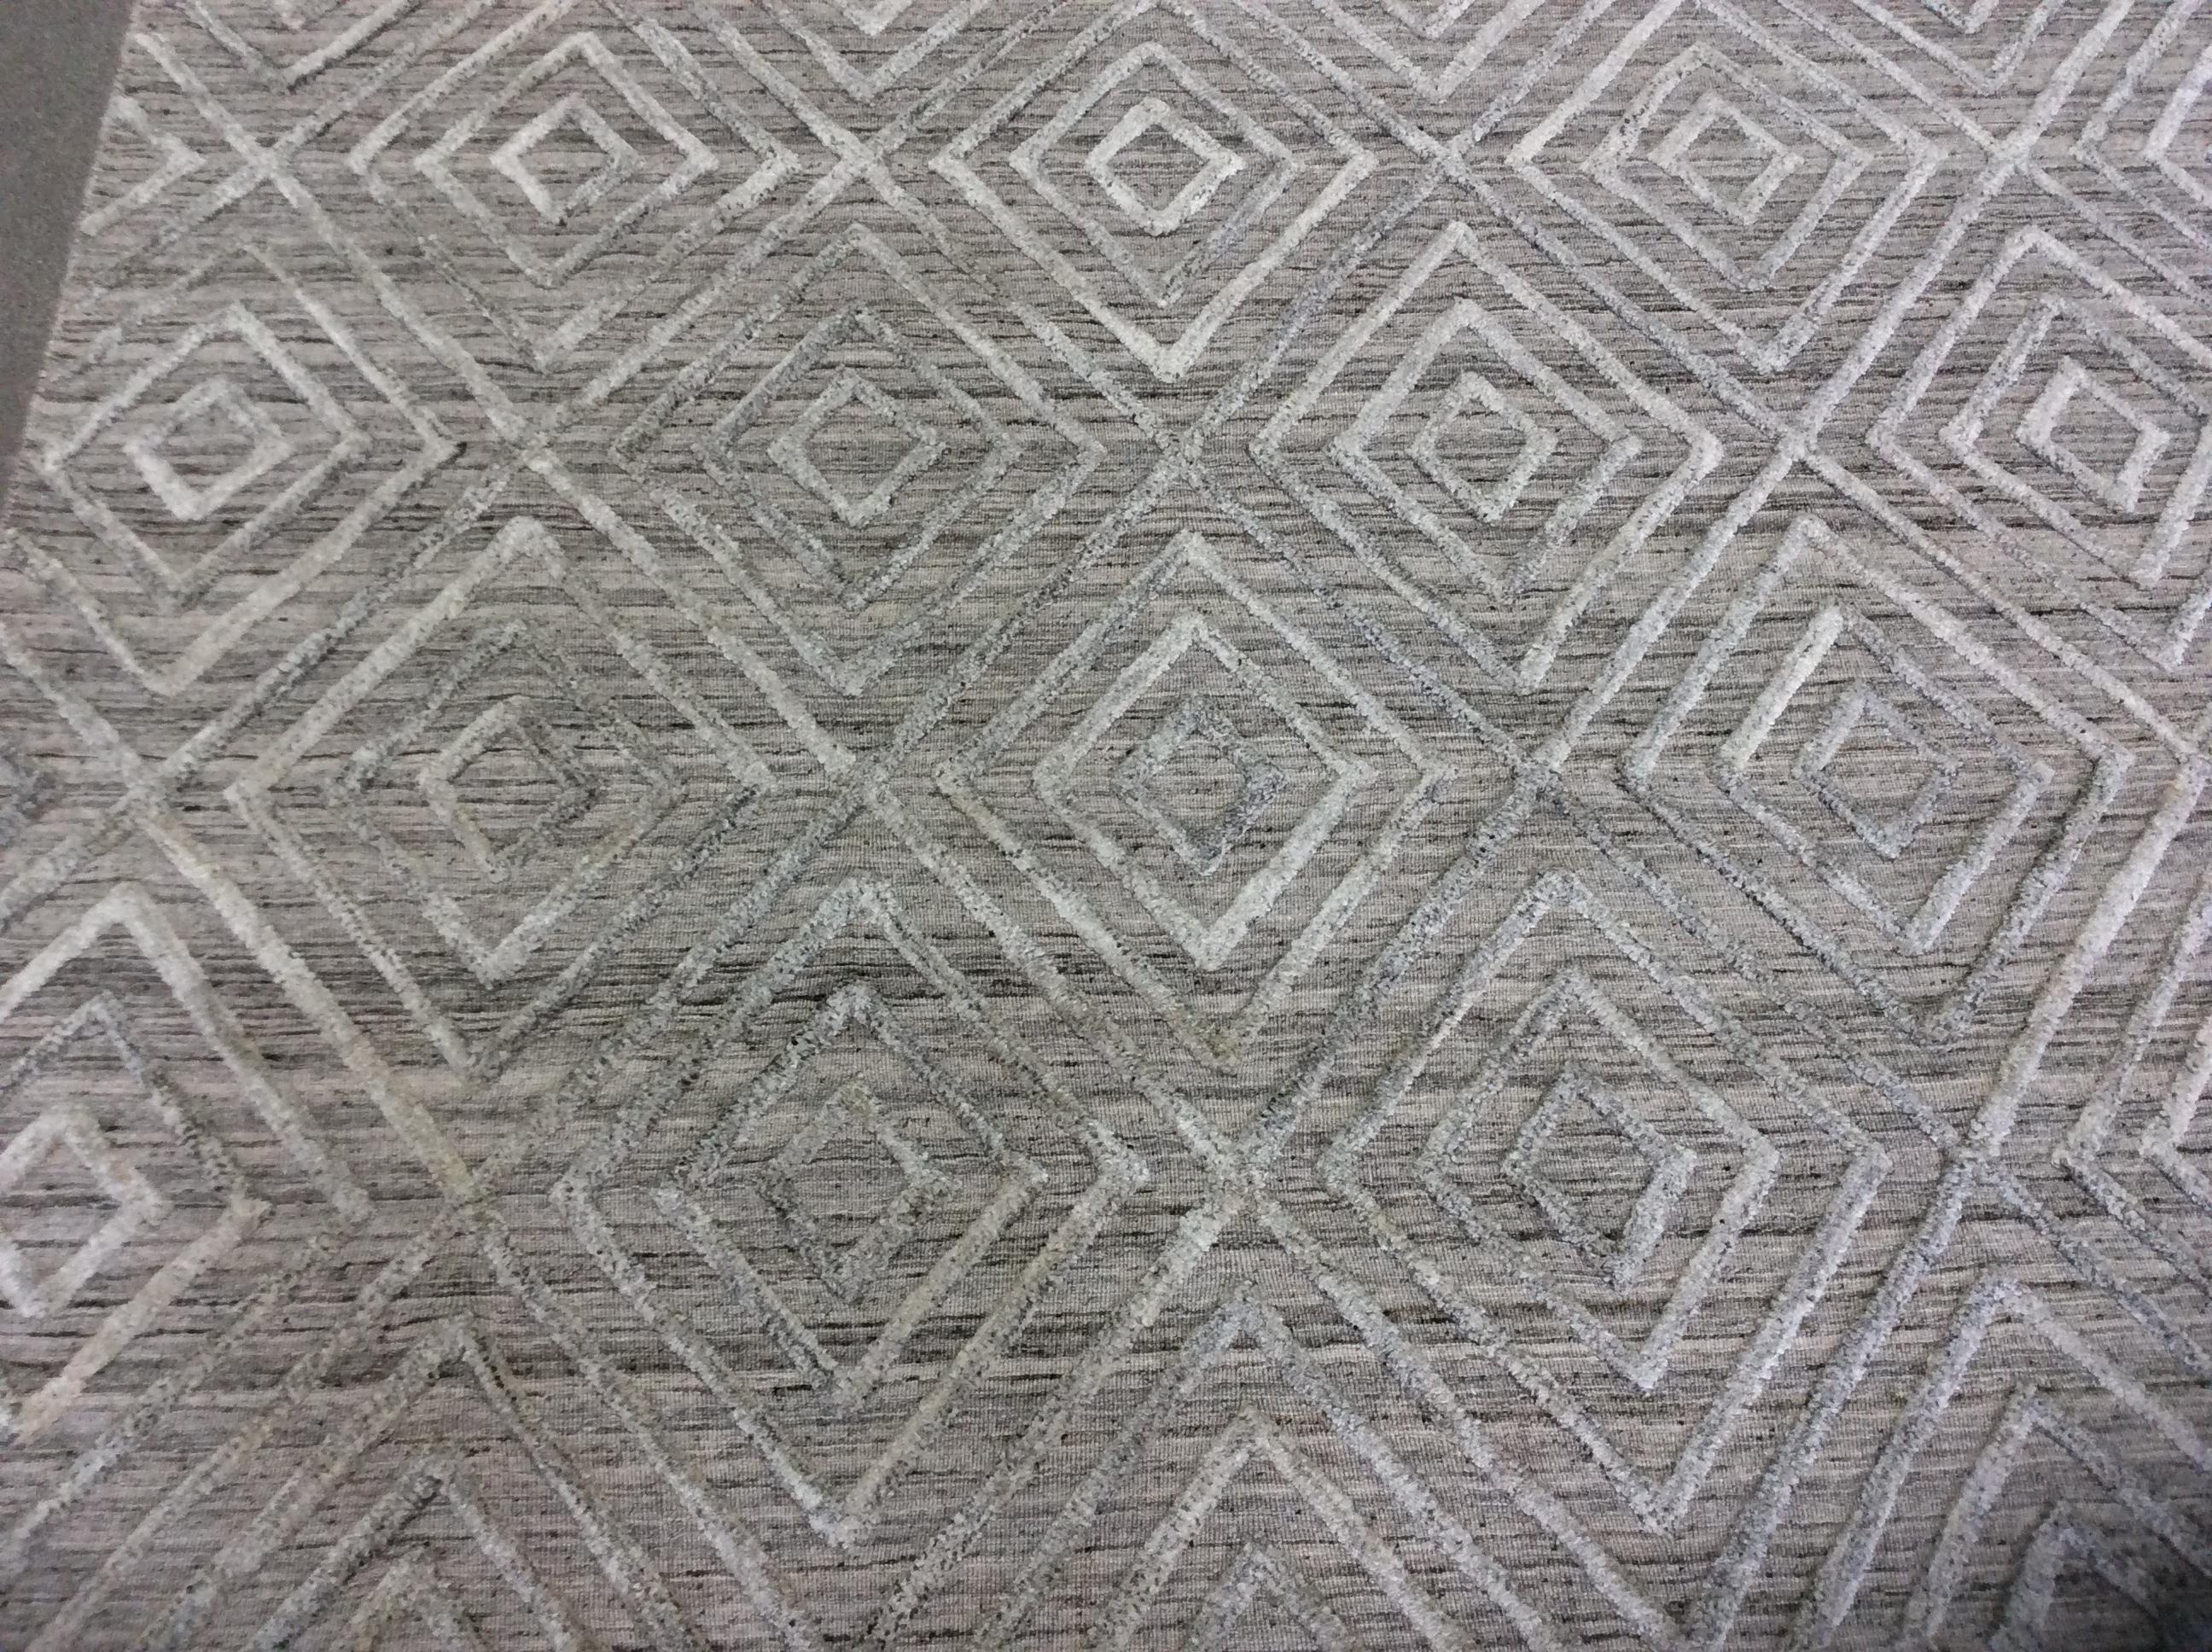 Geometric high low contemporary rug in taupe

High low design giving a casual yet polished look. With neutral color and raised geometry pattern.